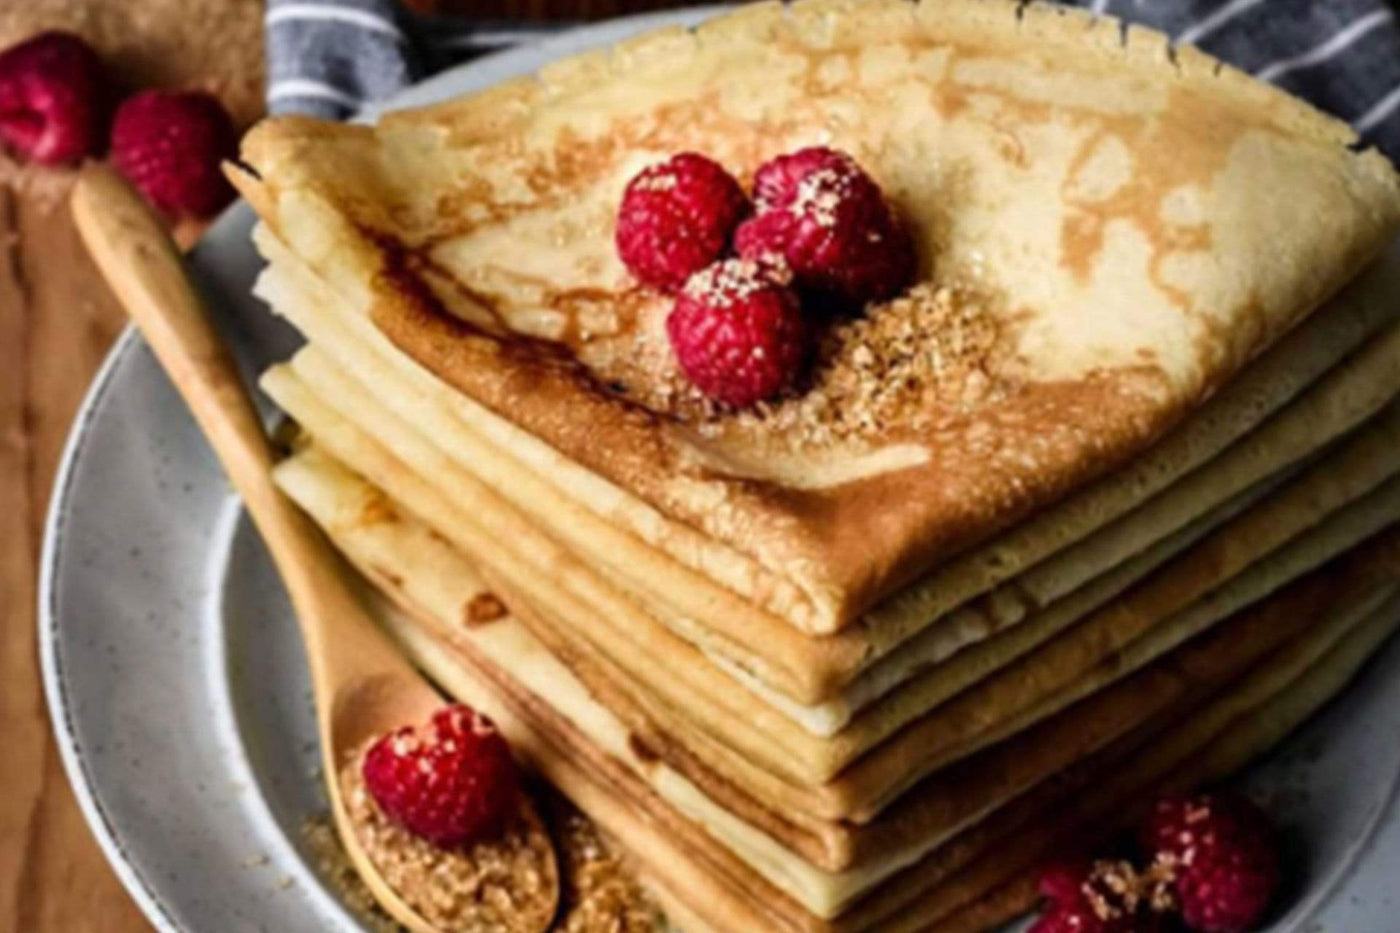 In the Kitchen: Parisian Crepes